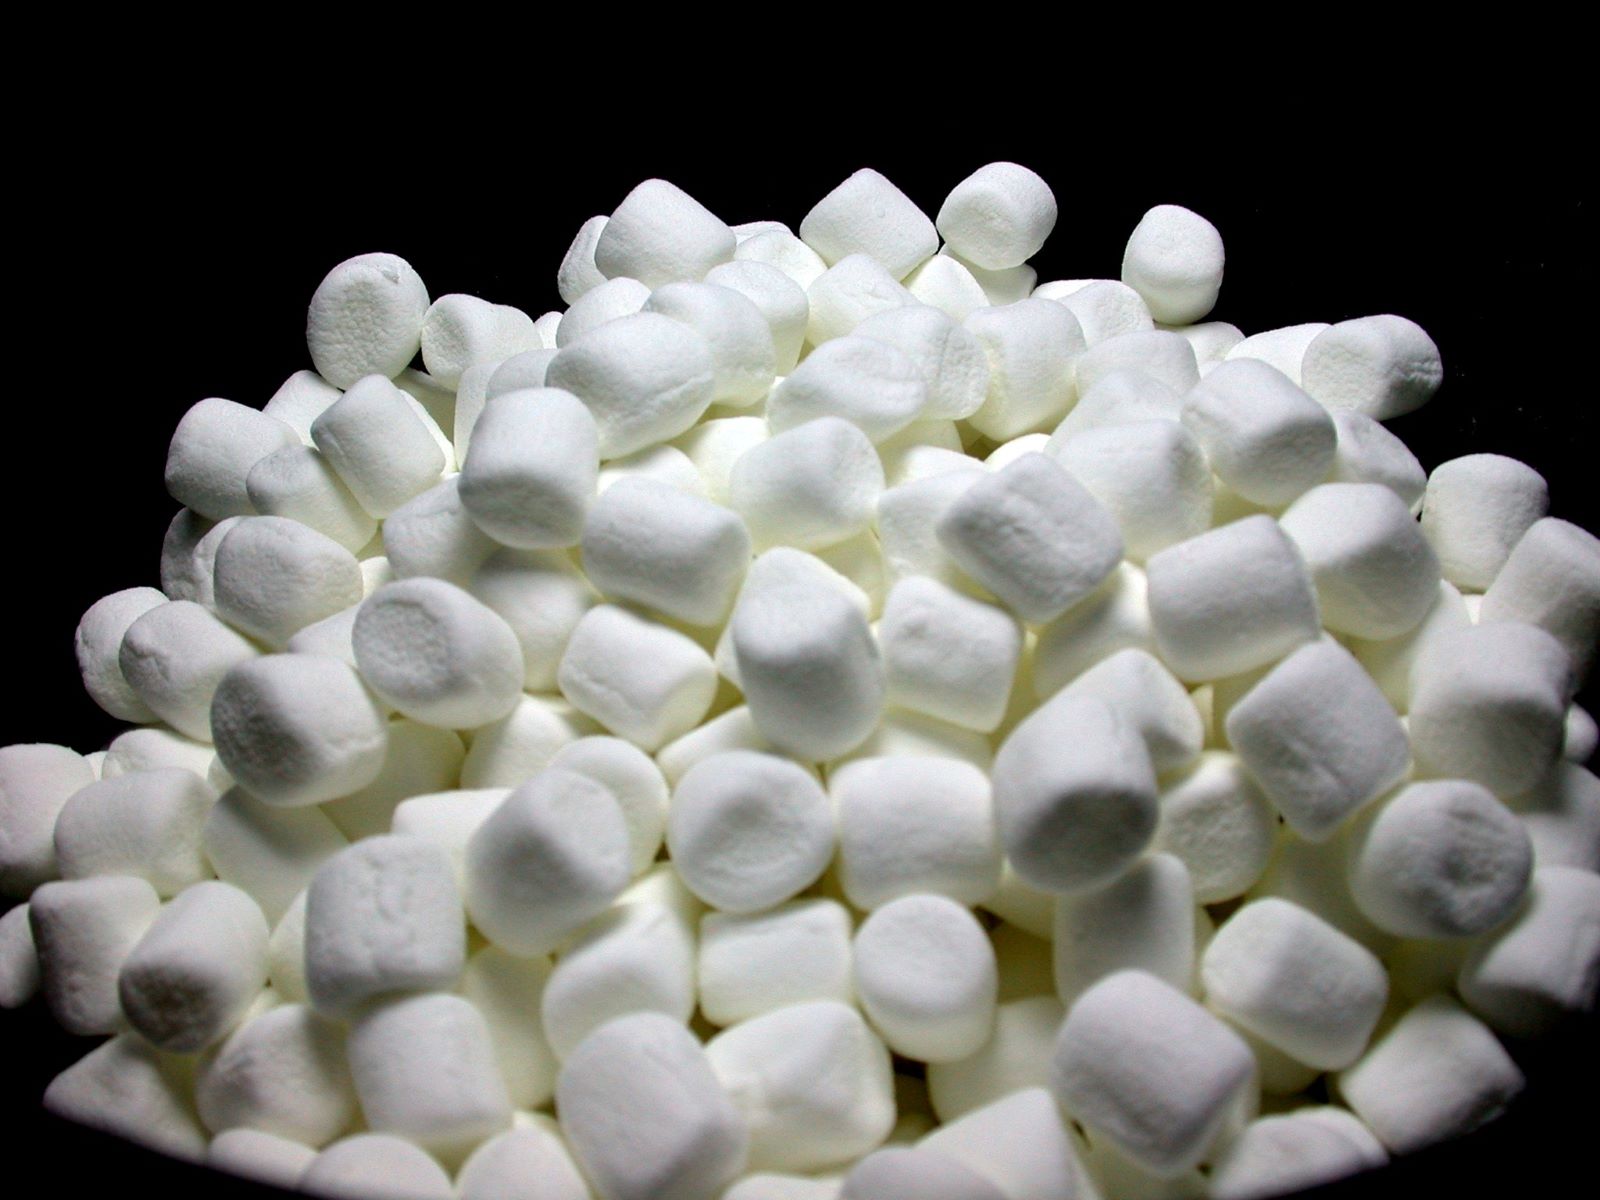 Surprising Discovery: Year-Old Marshmallows Found In Pantry – Are They Still Safe To Eat?